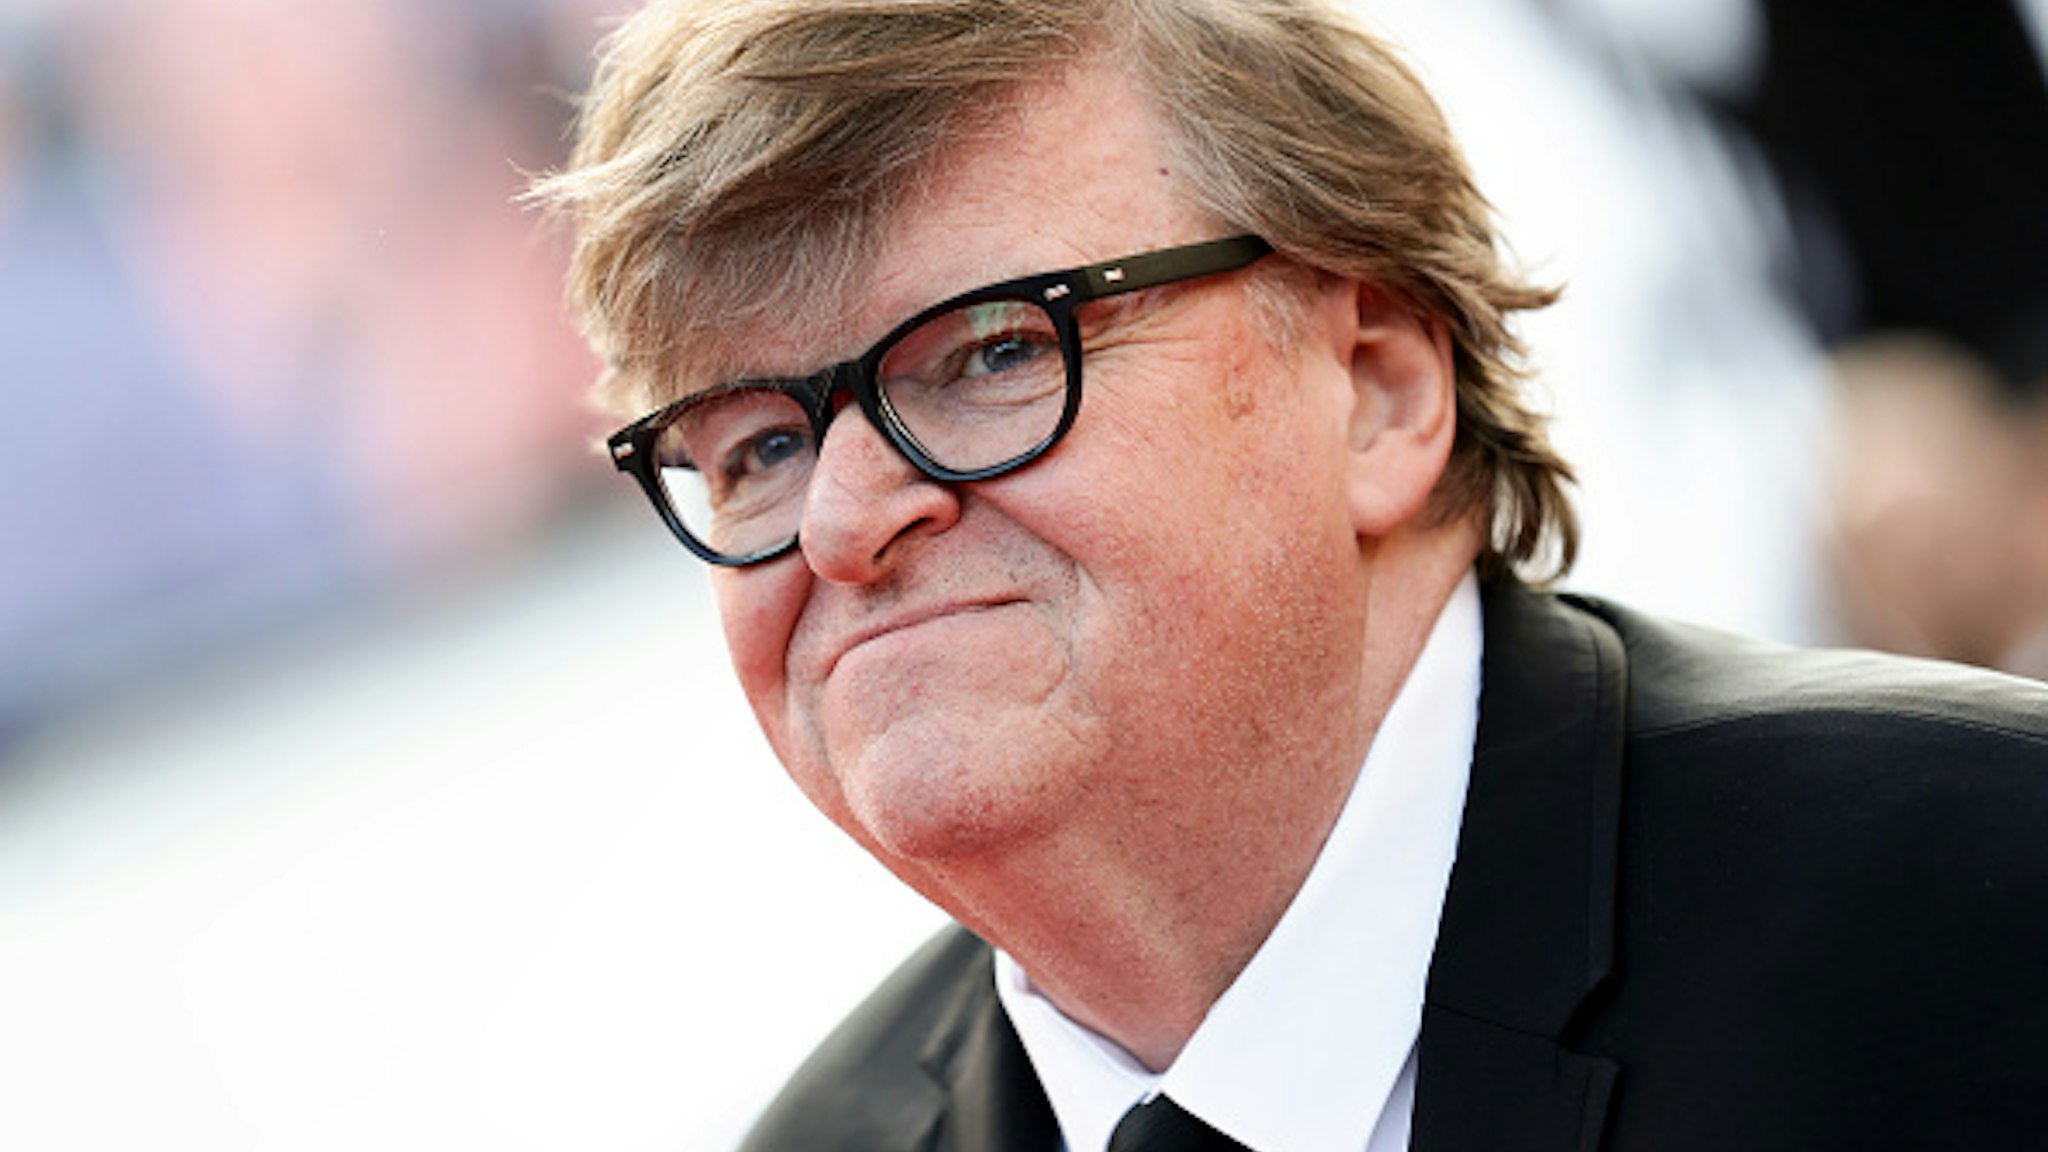 CANNES, FRANCE - MAY 25: Michael Moore attends the closing ceremony screening of "The Specials" during the 72nd annual Cannes Film Festival on May 25, 2019 in Cannes, France.